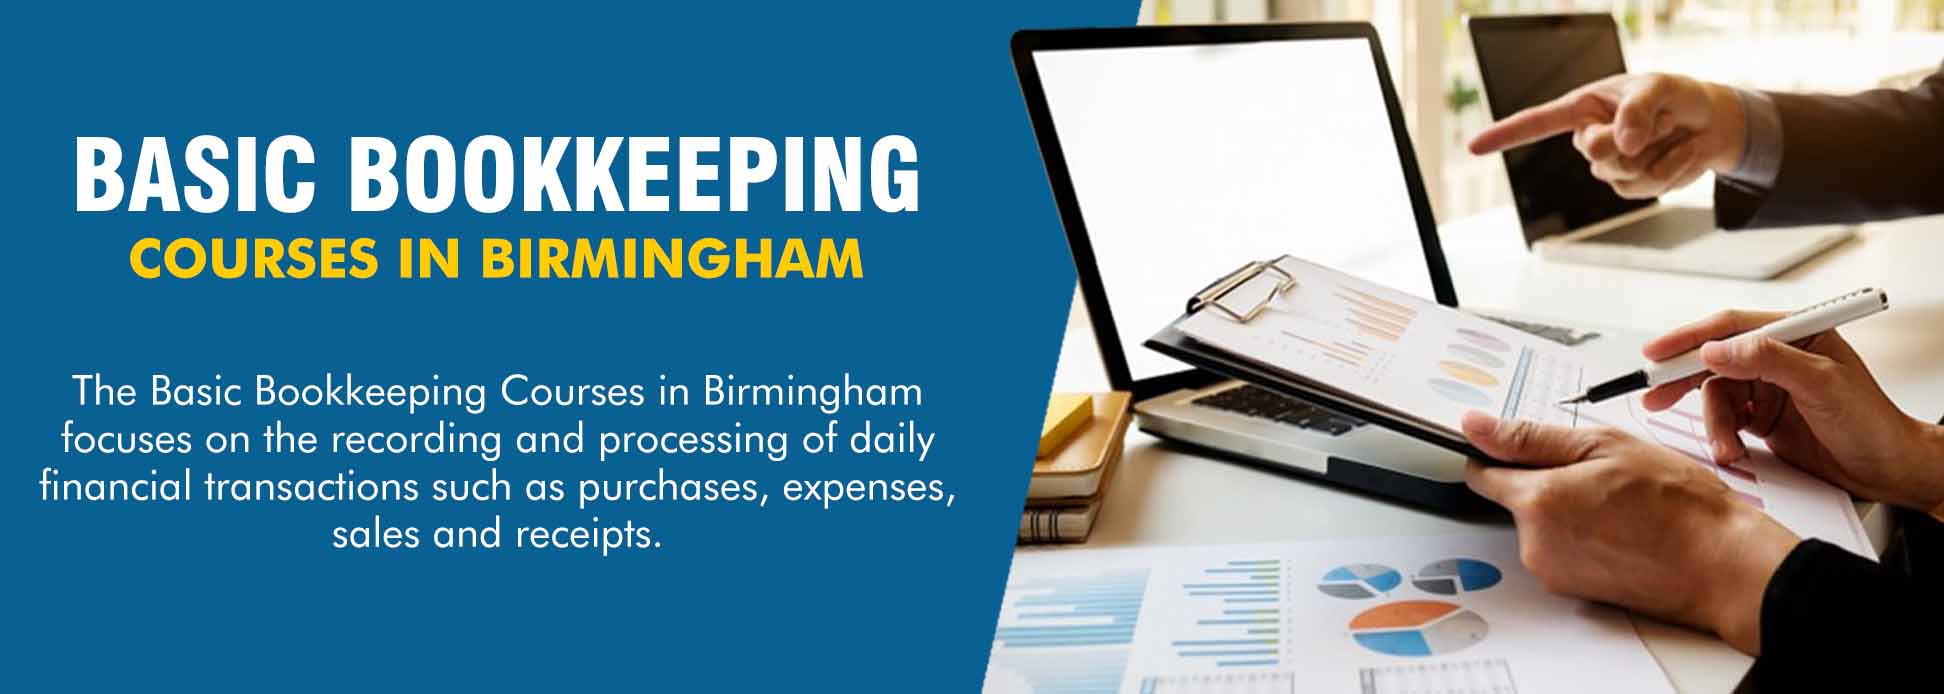 basic-bookkeeping-courses-in-birmingham